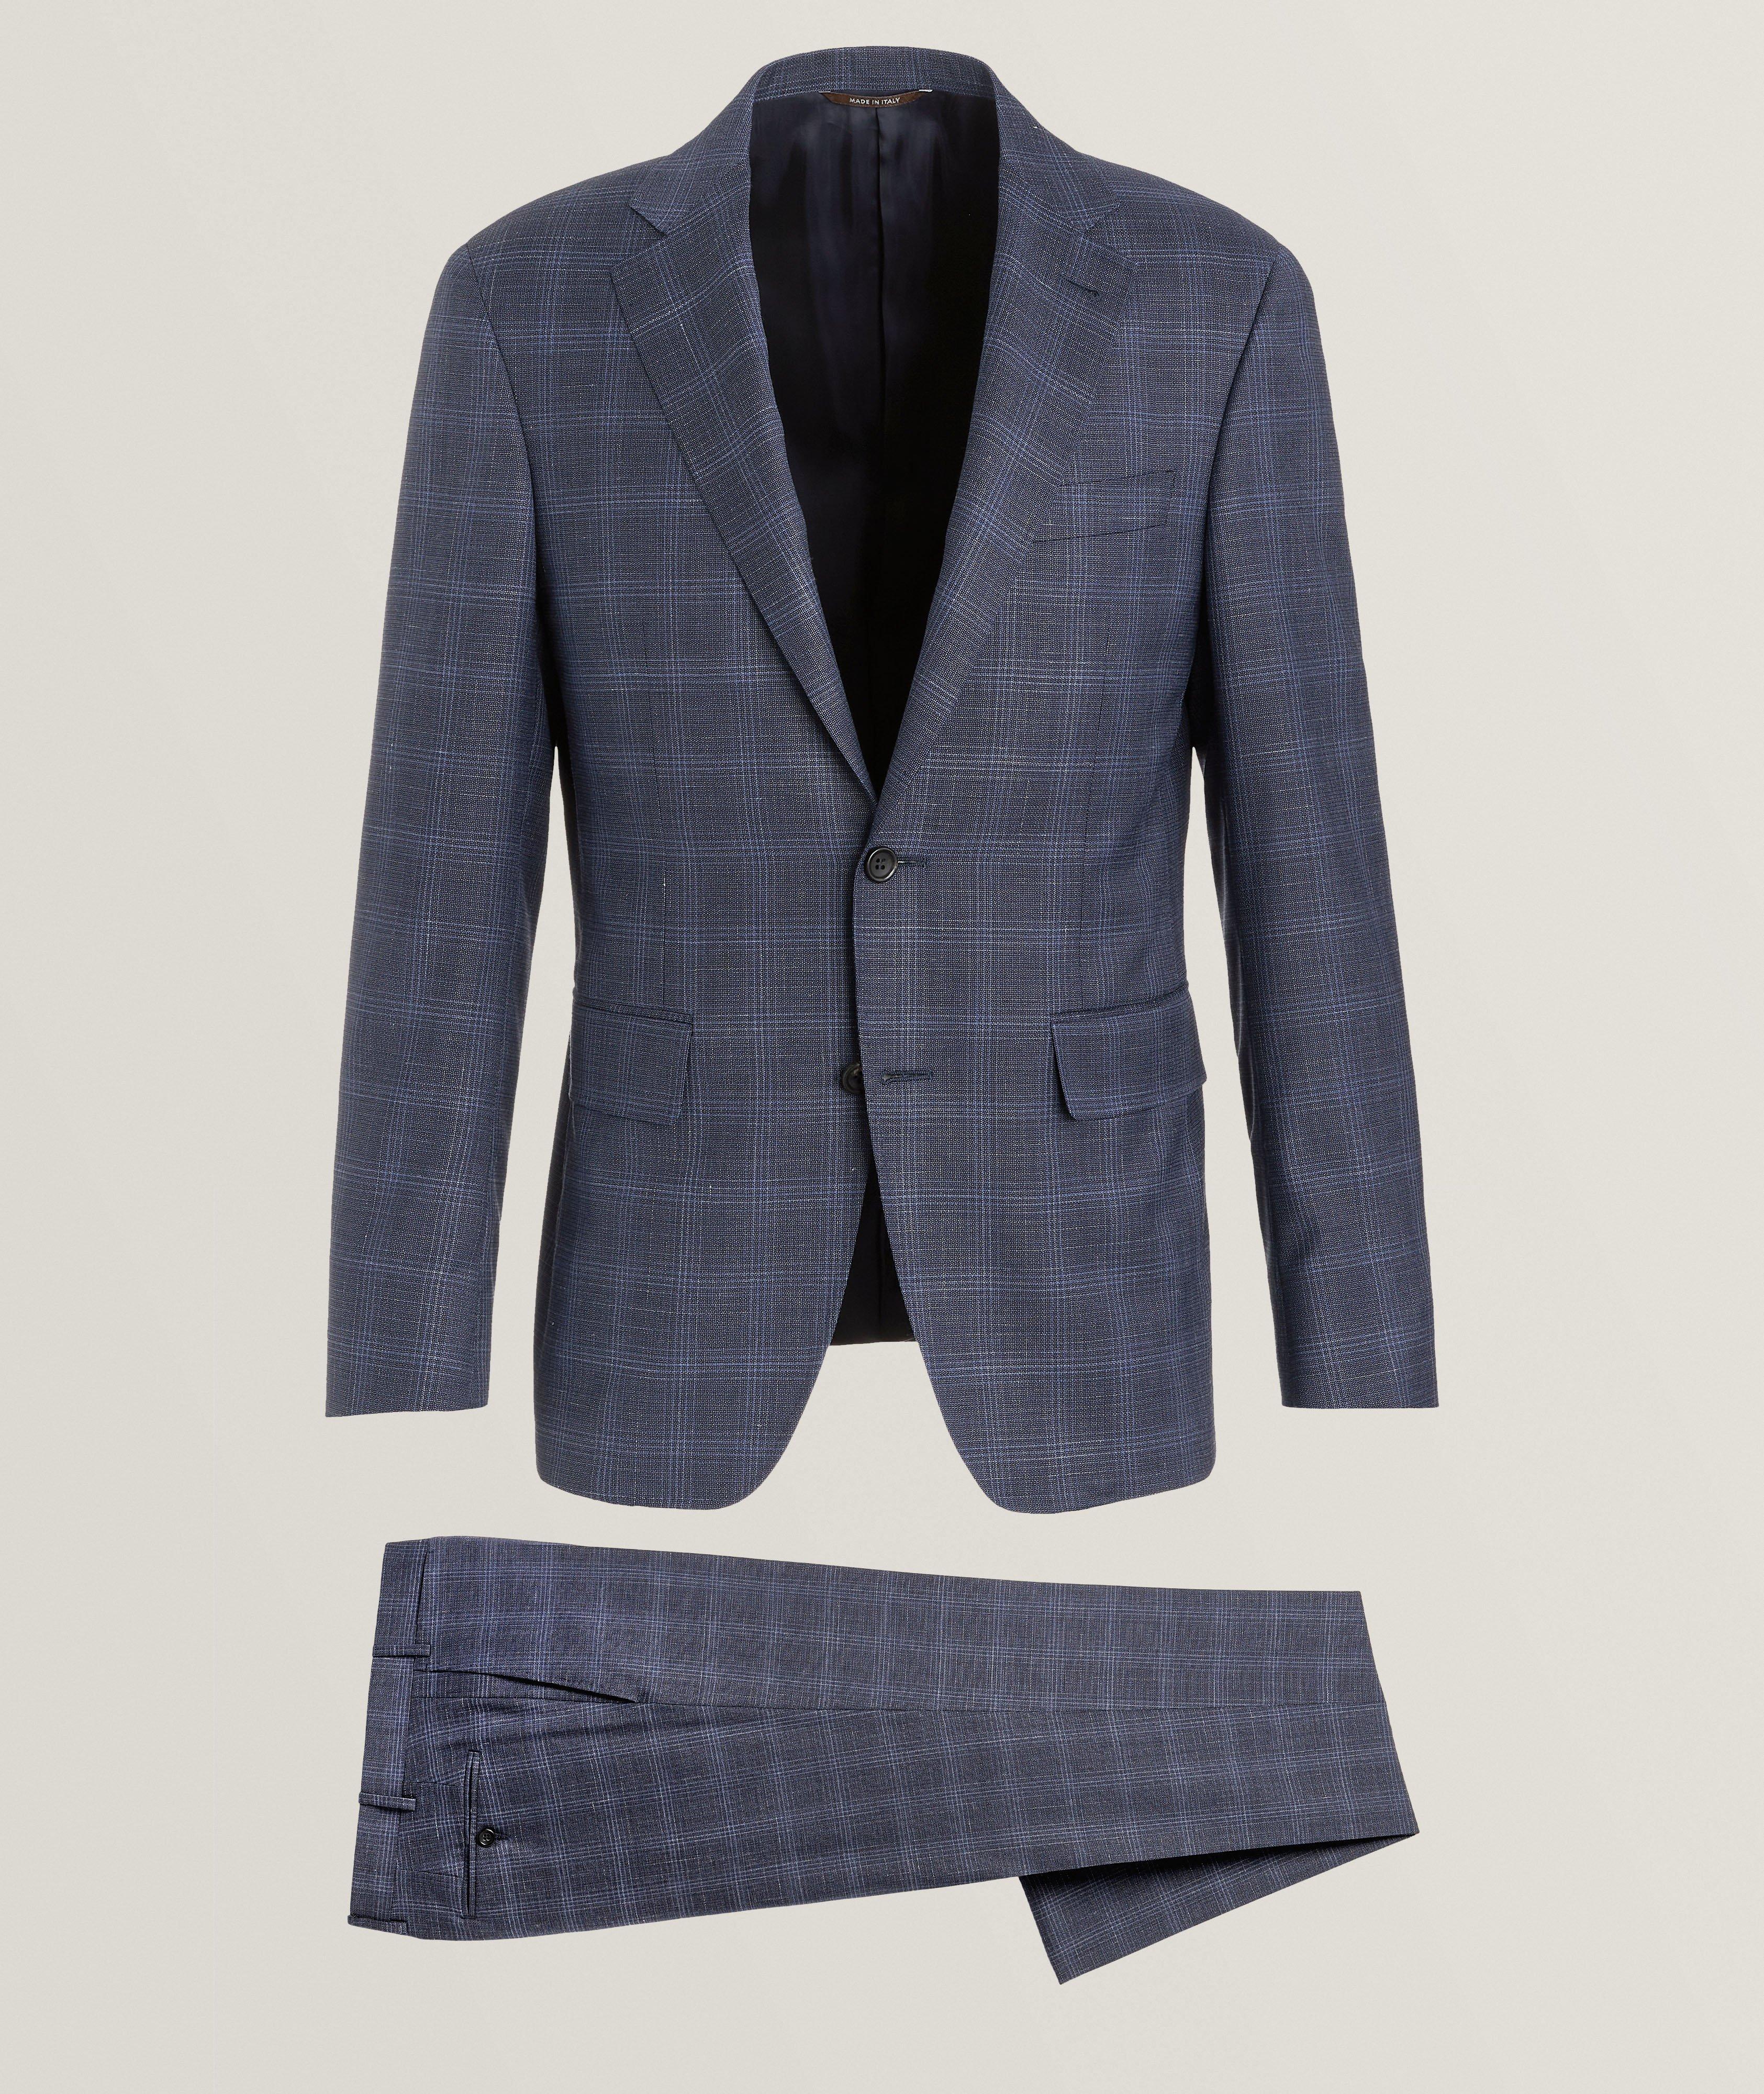 Kei Checkered Linen-Wool Suit image 0